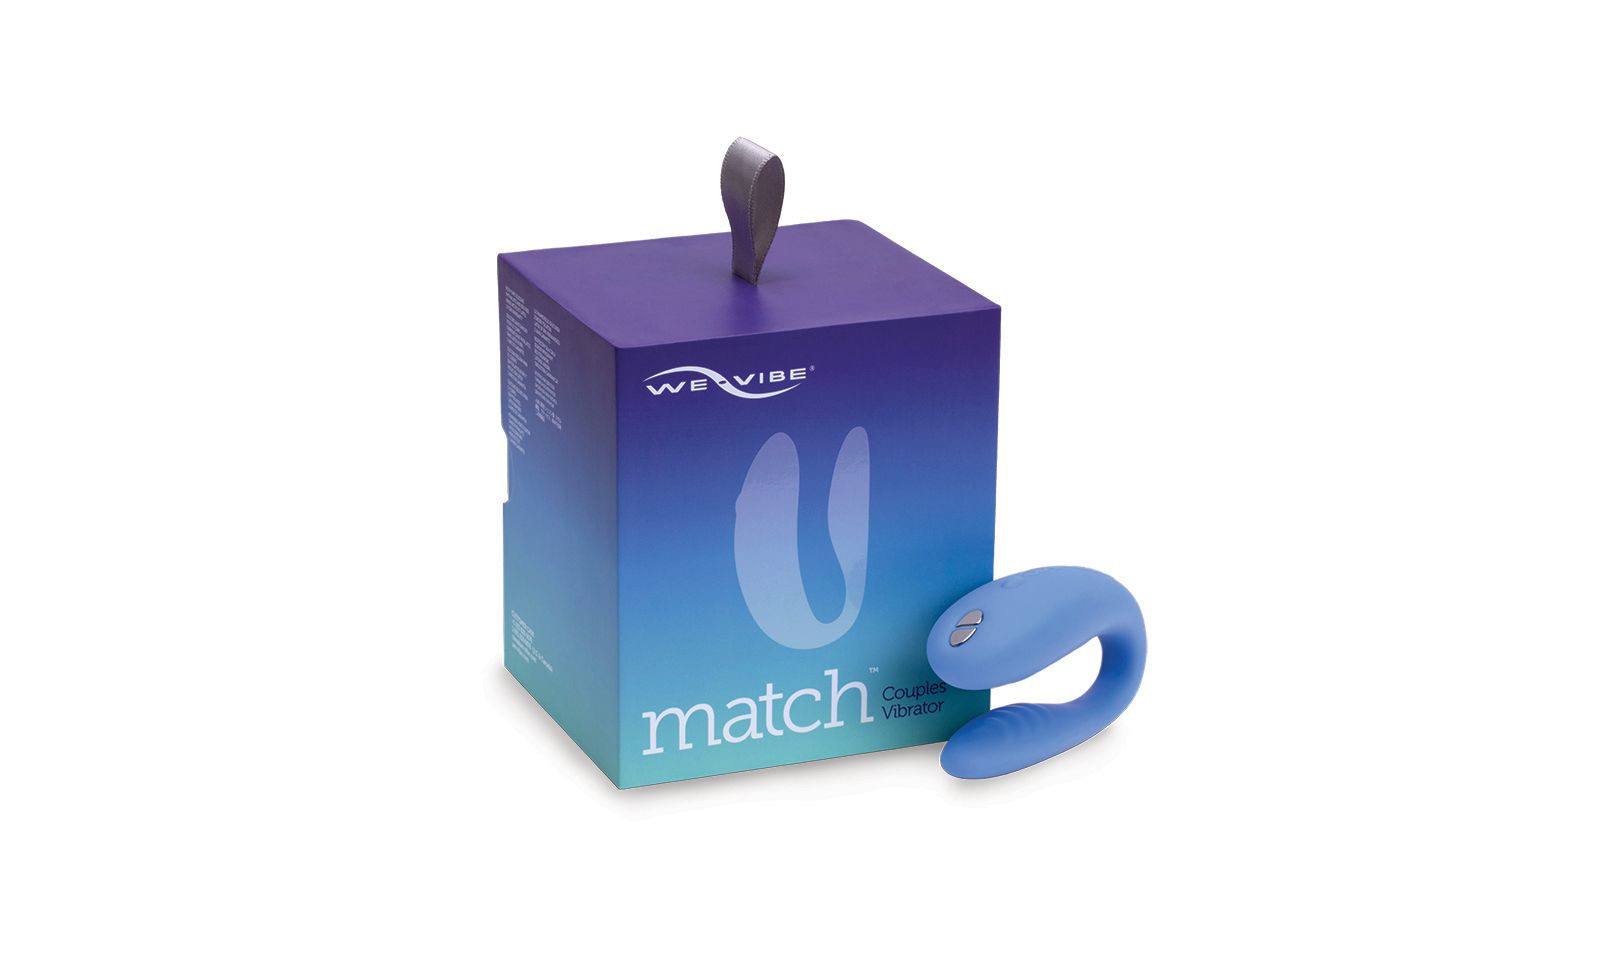 Entrenue Shipping We-Vibe's Match Couples Pleasure Product